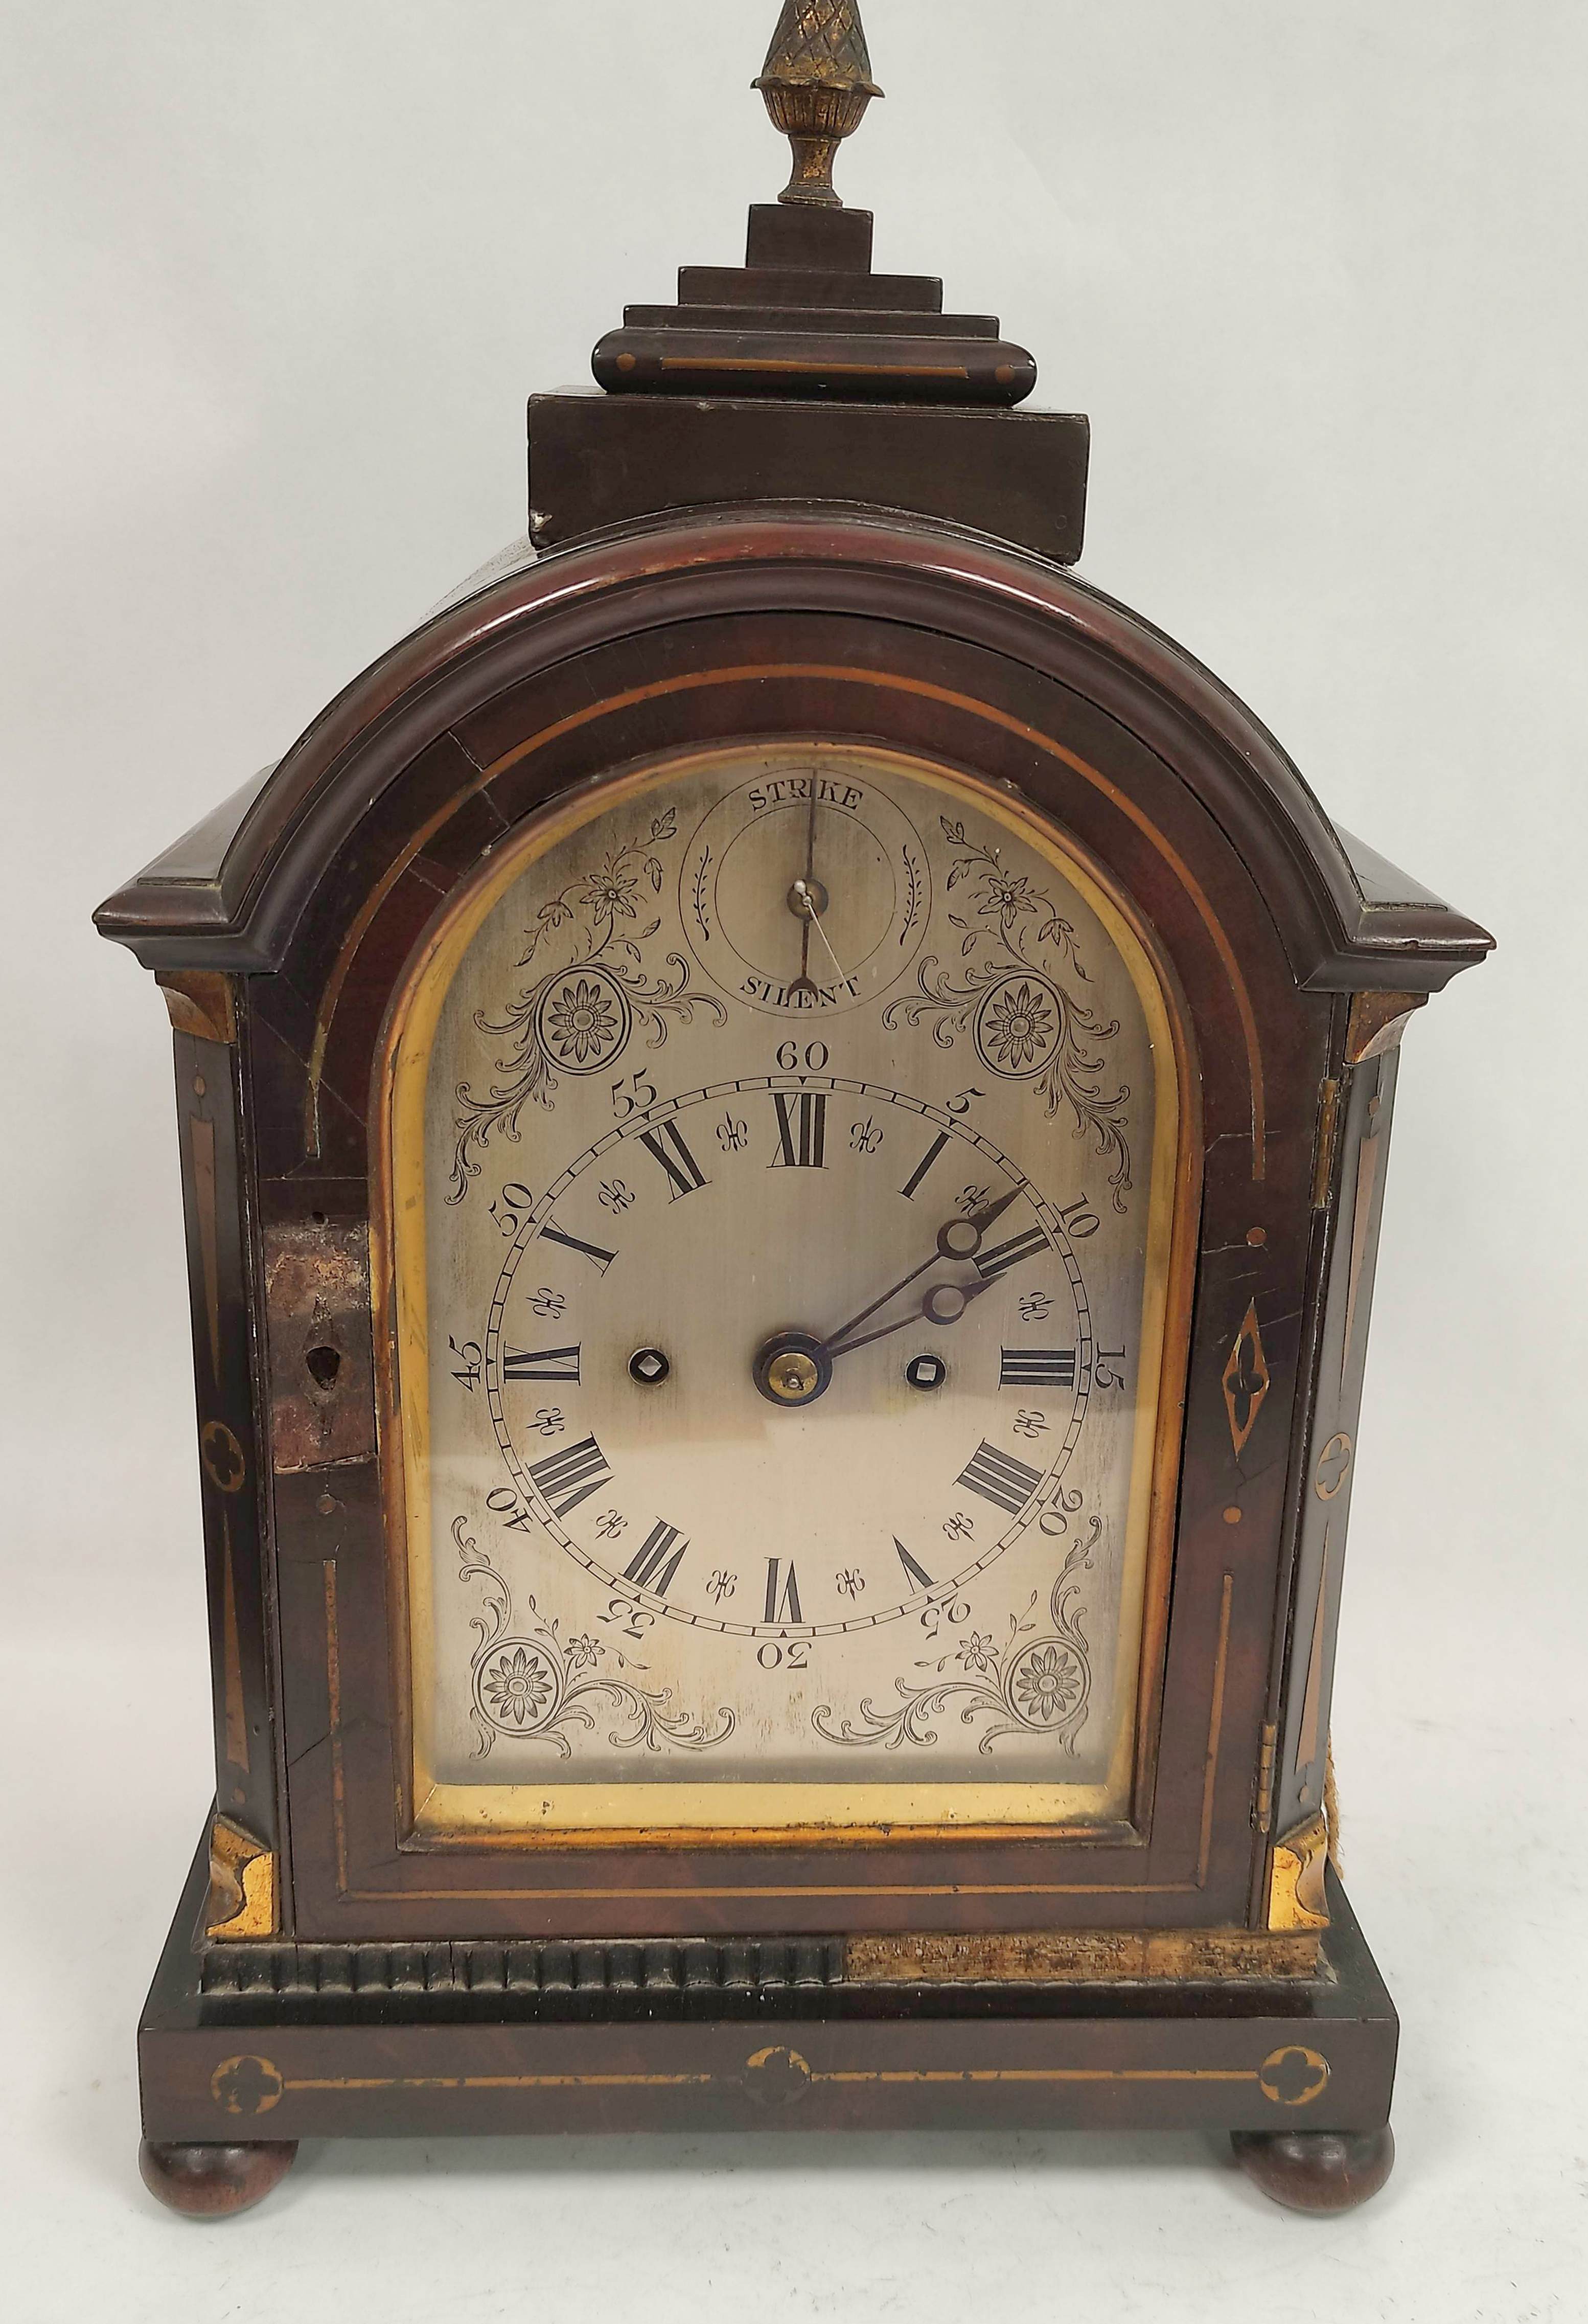 Late Georgian eight day mantel clock, unsigned, with substantial seven pillar anchor movement and - Image 2 of 6